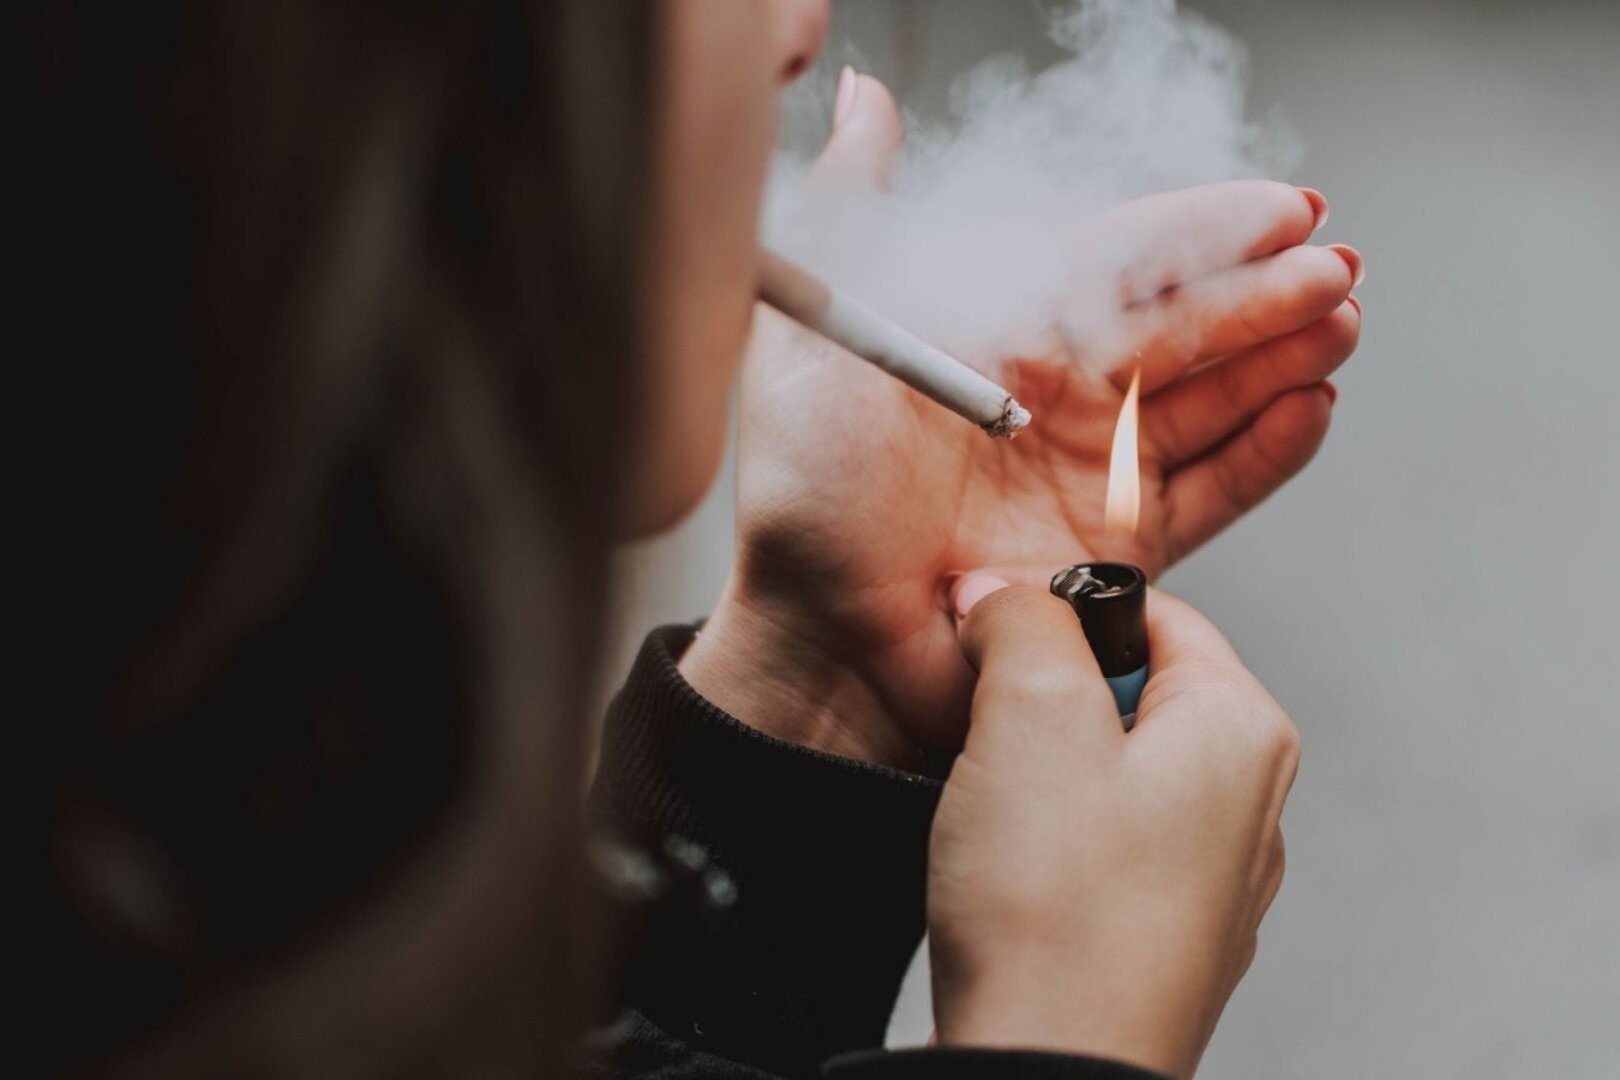 Shocking: Parent Gives Teenager Permission To Smoke At Home – Is It Legal?